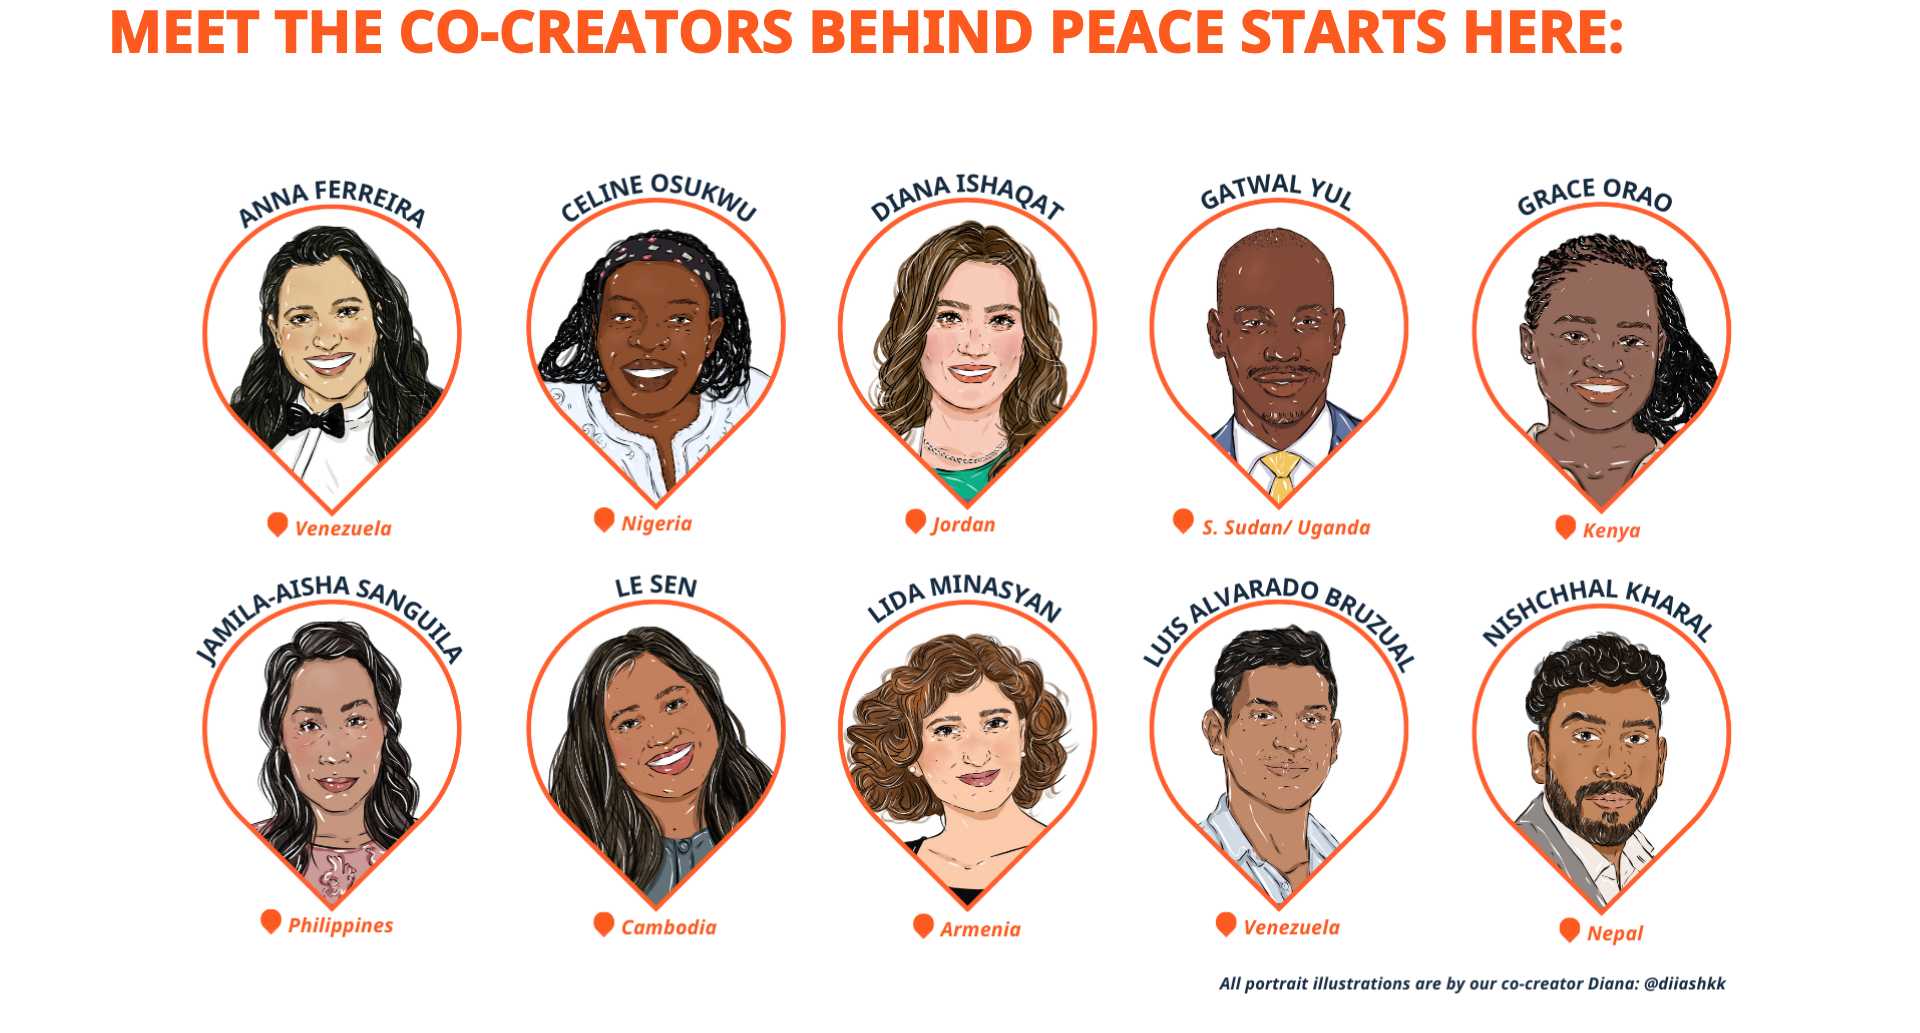 Meet the cocreators behind peace starts here